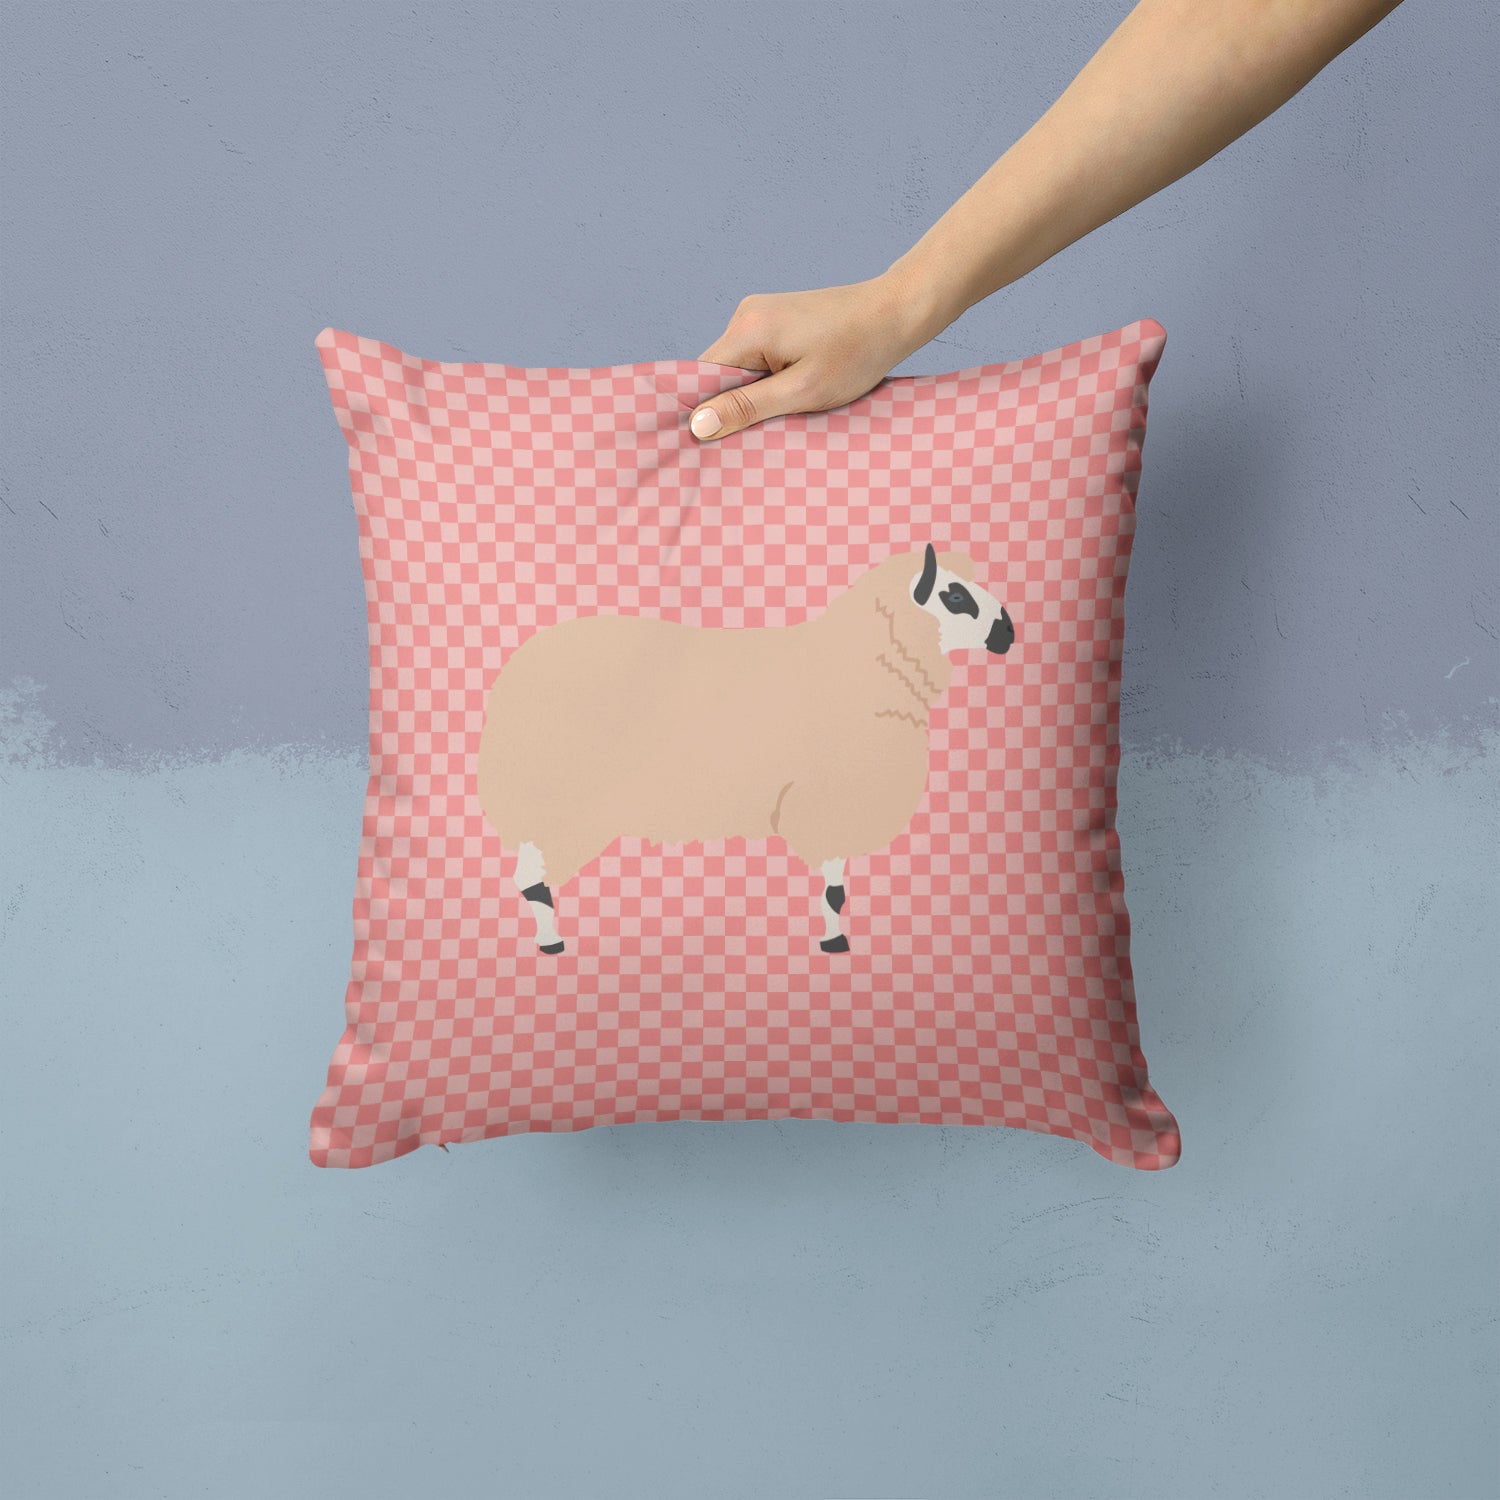 Kerry Hill Sheep Pink Check Fabric Decorative Pillow BB7979PW1414 - the-store.com